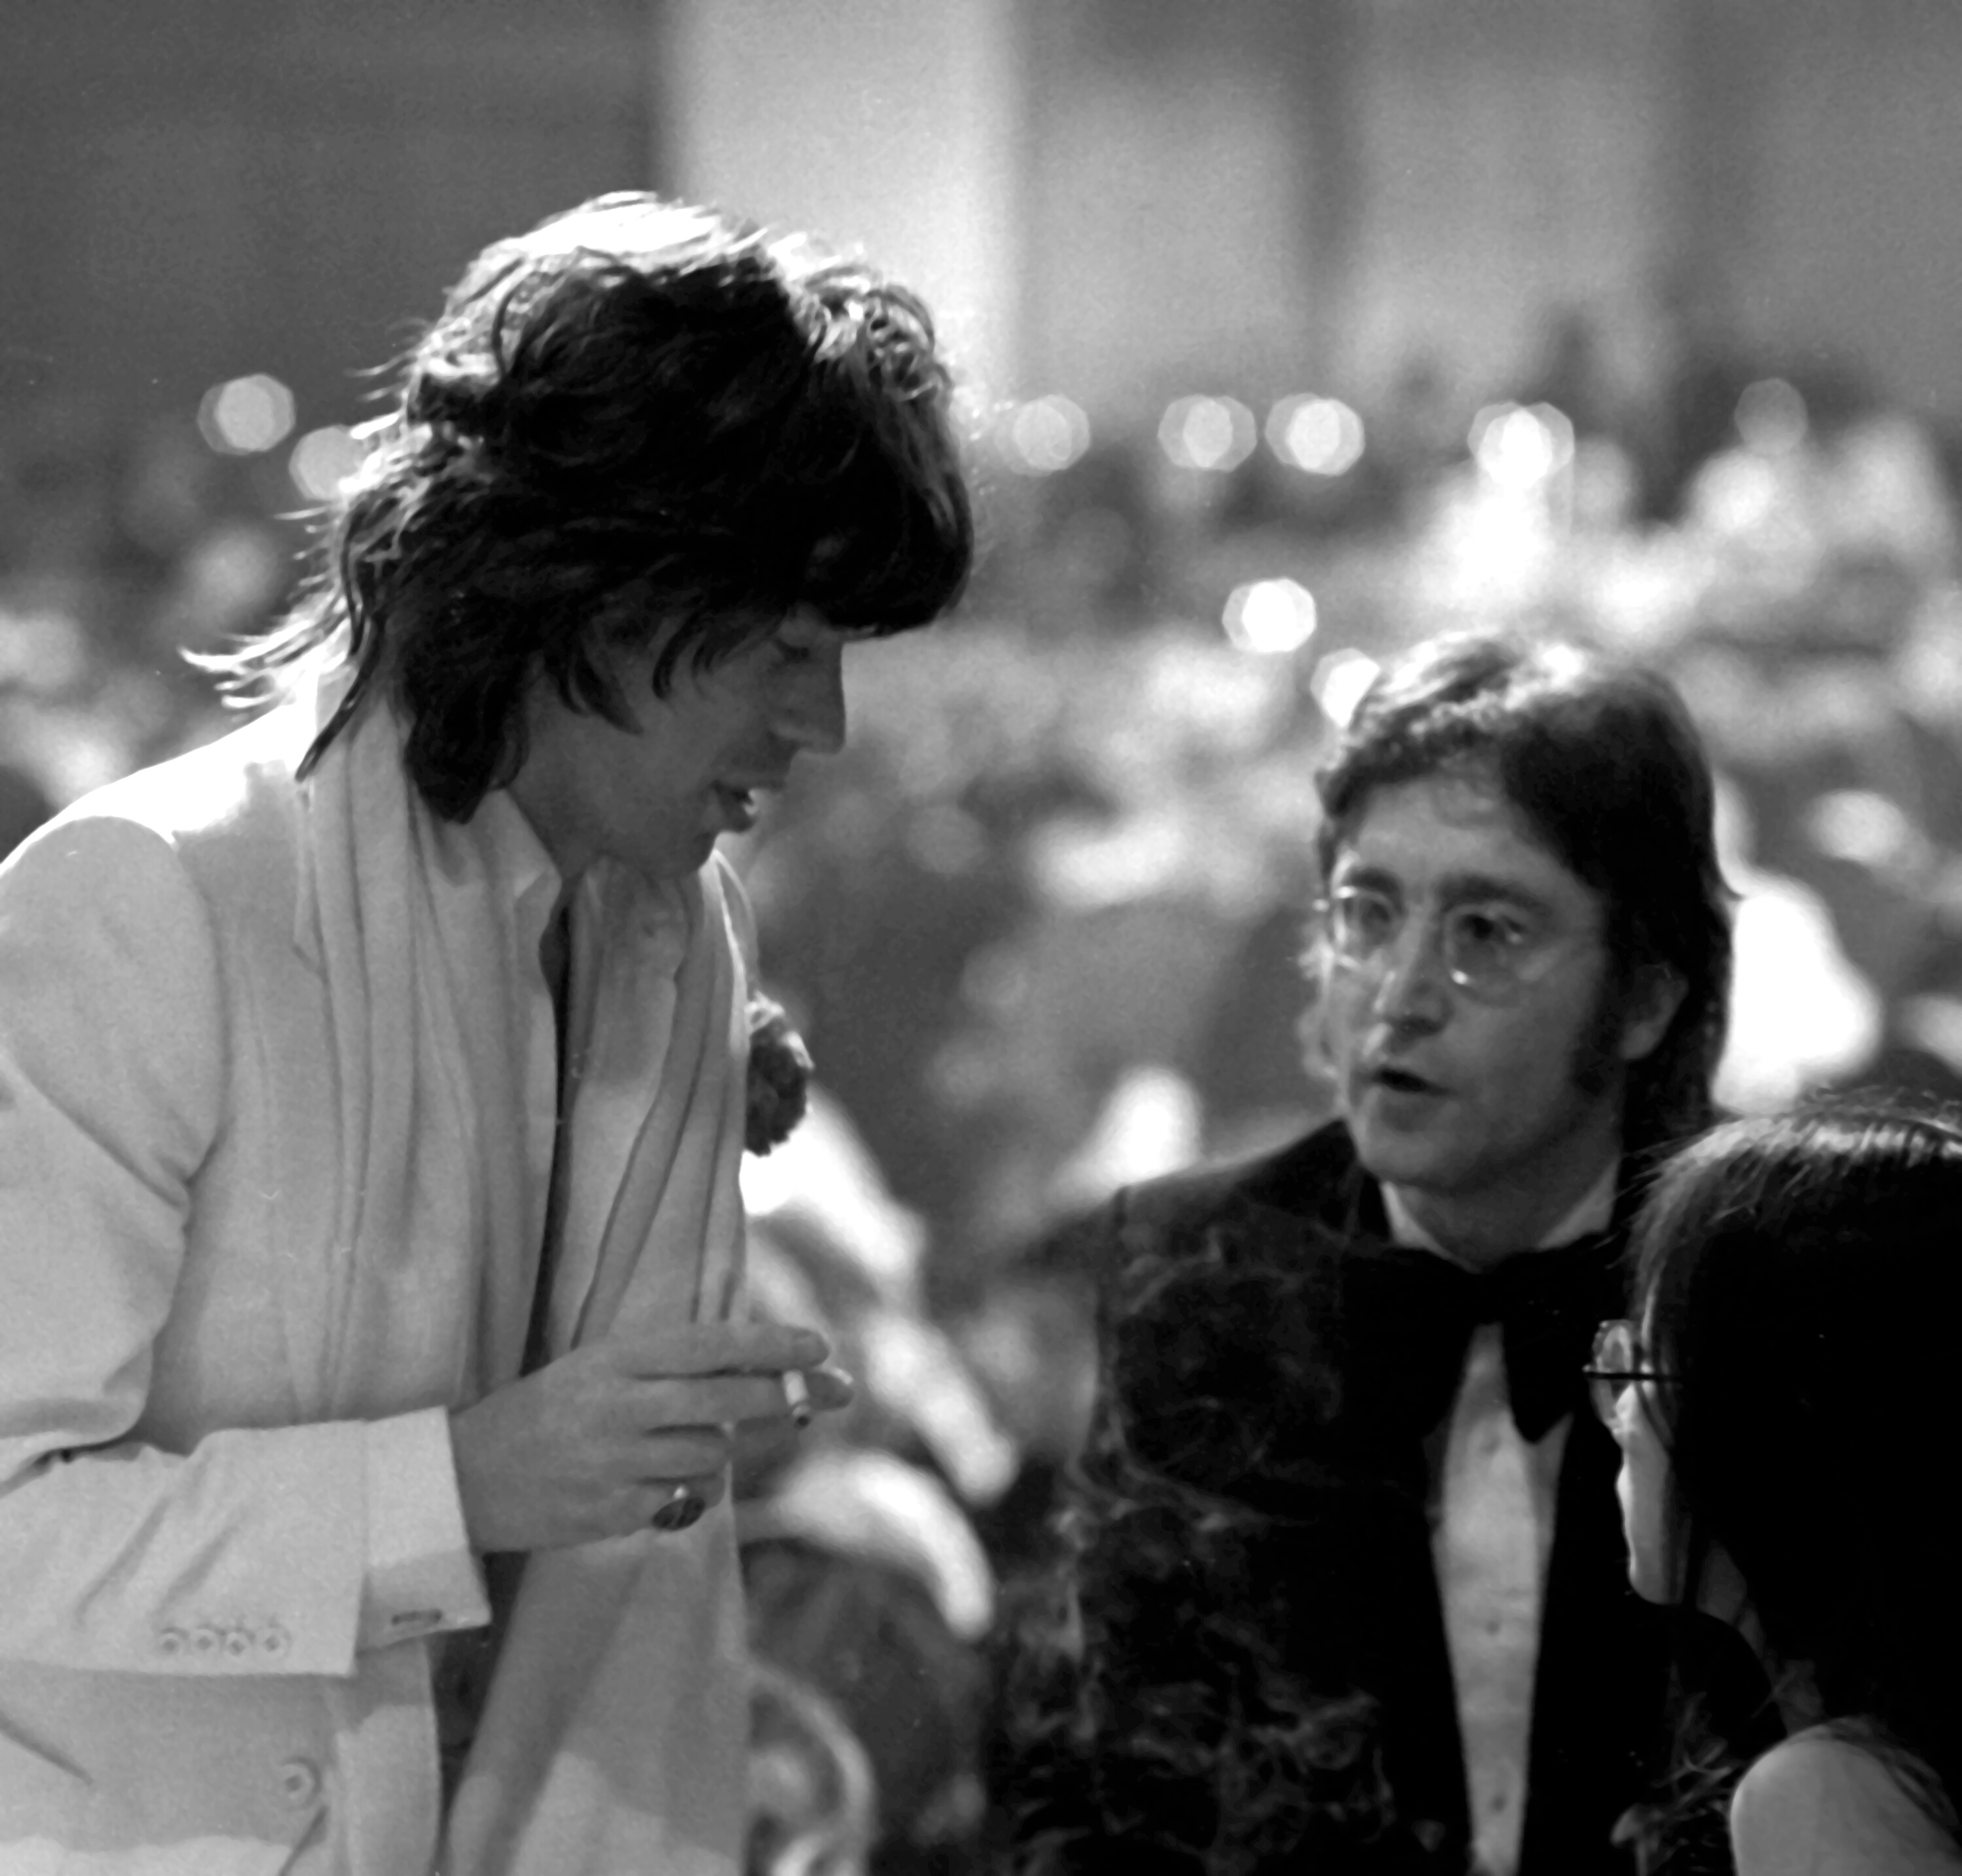 Mick Jagger and John Lennon in suits